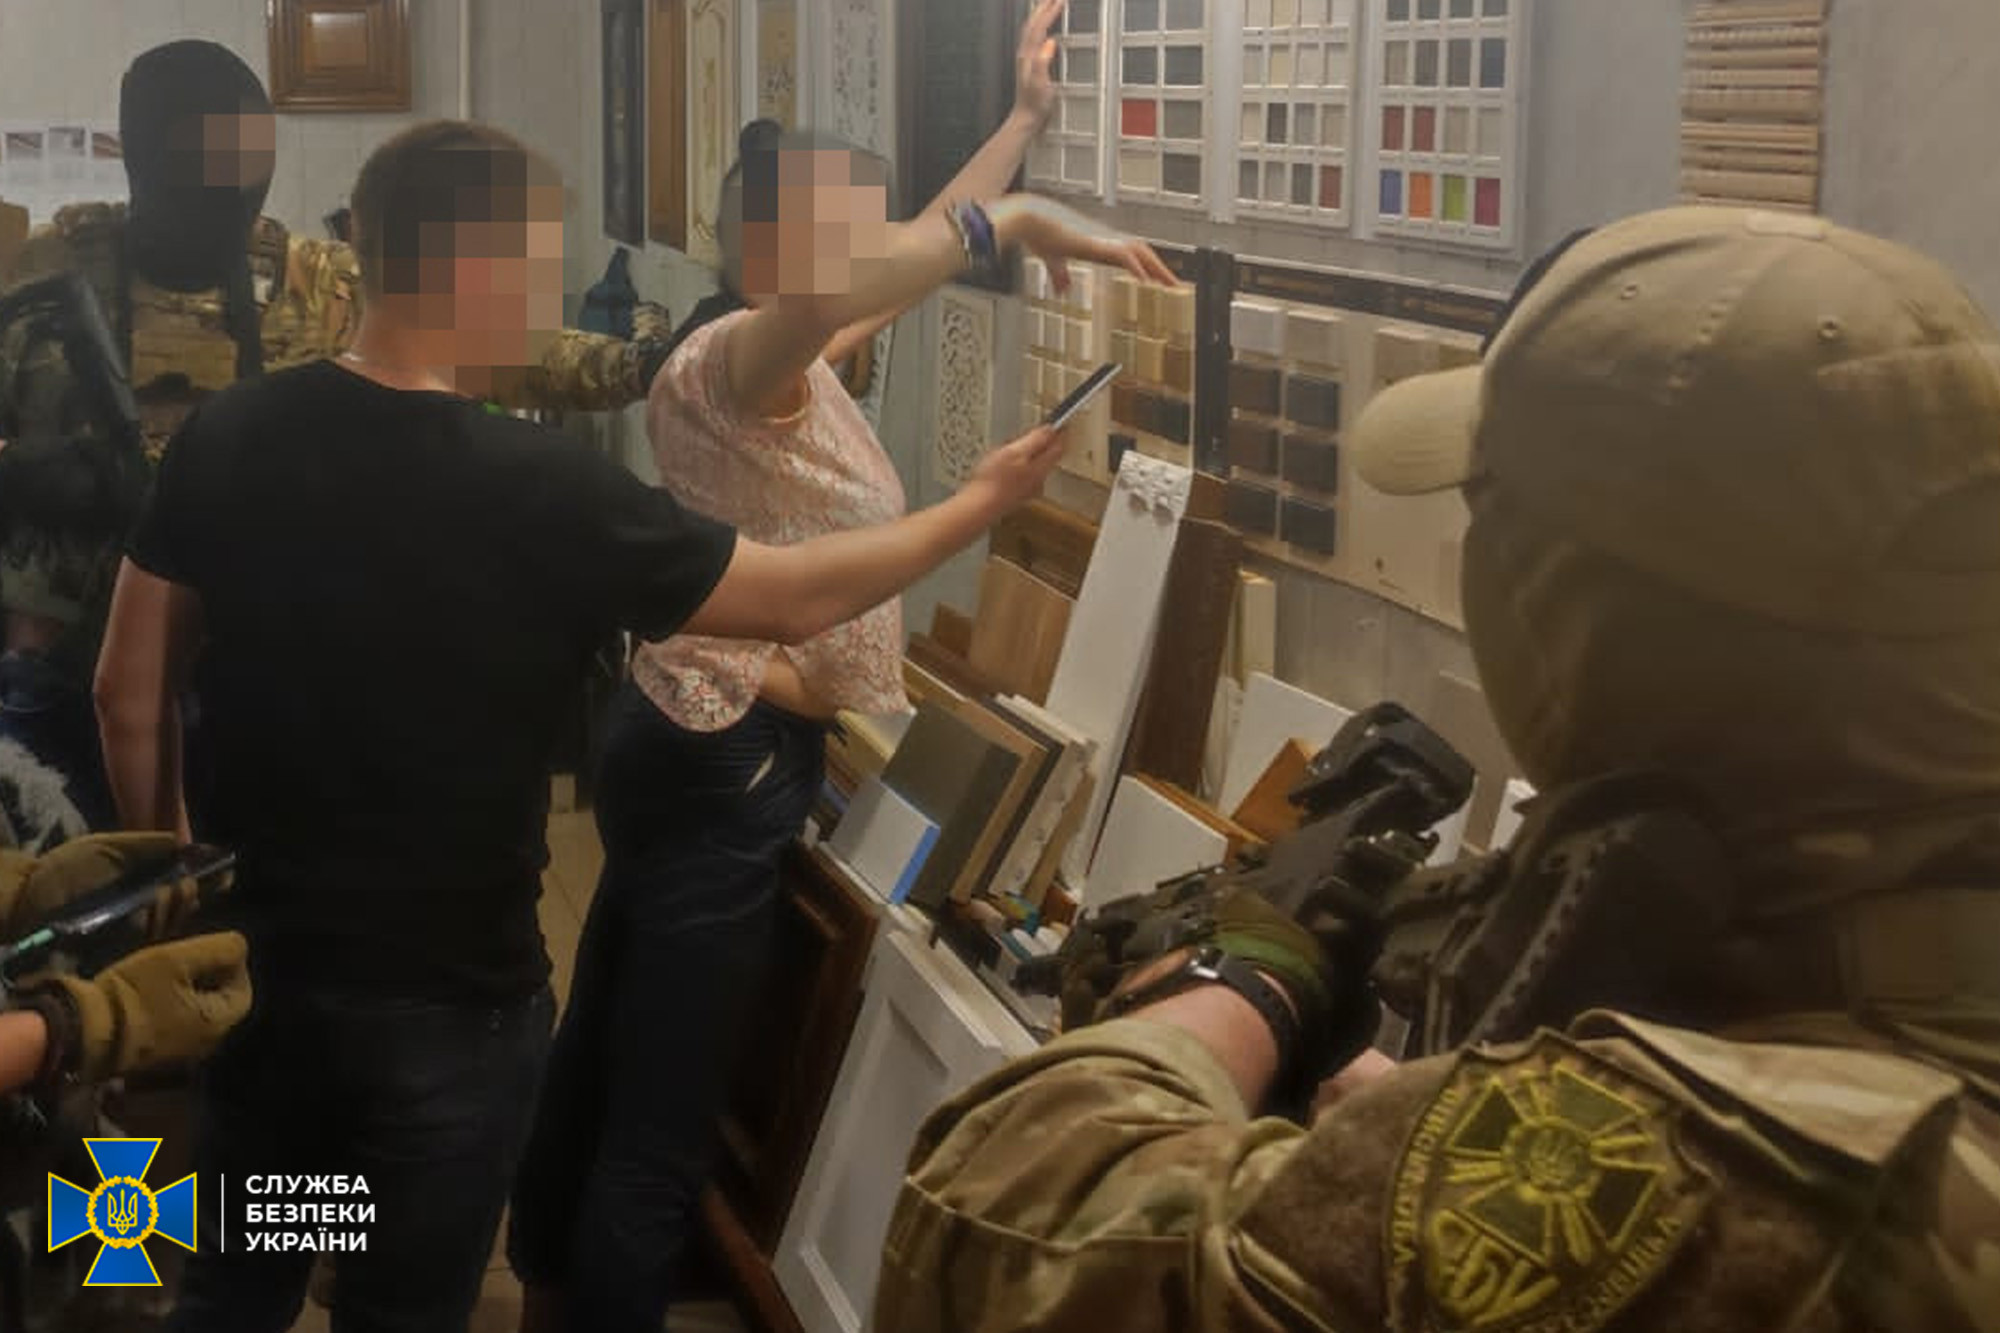 In Krivoy Rog, an FSB agent was exposed